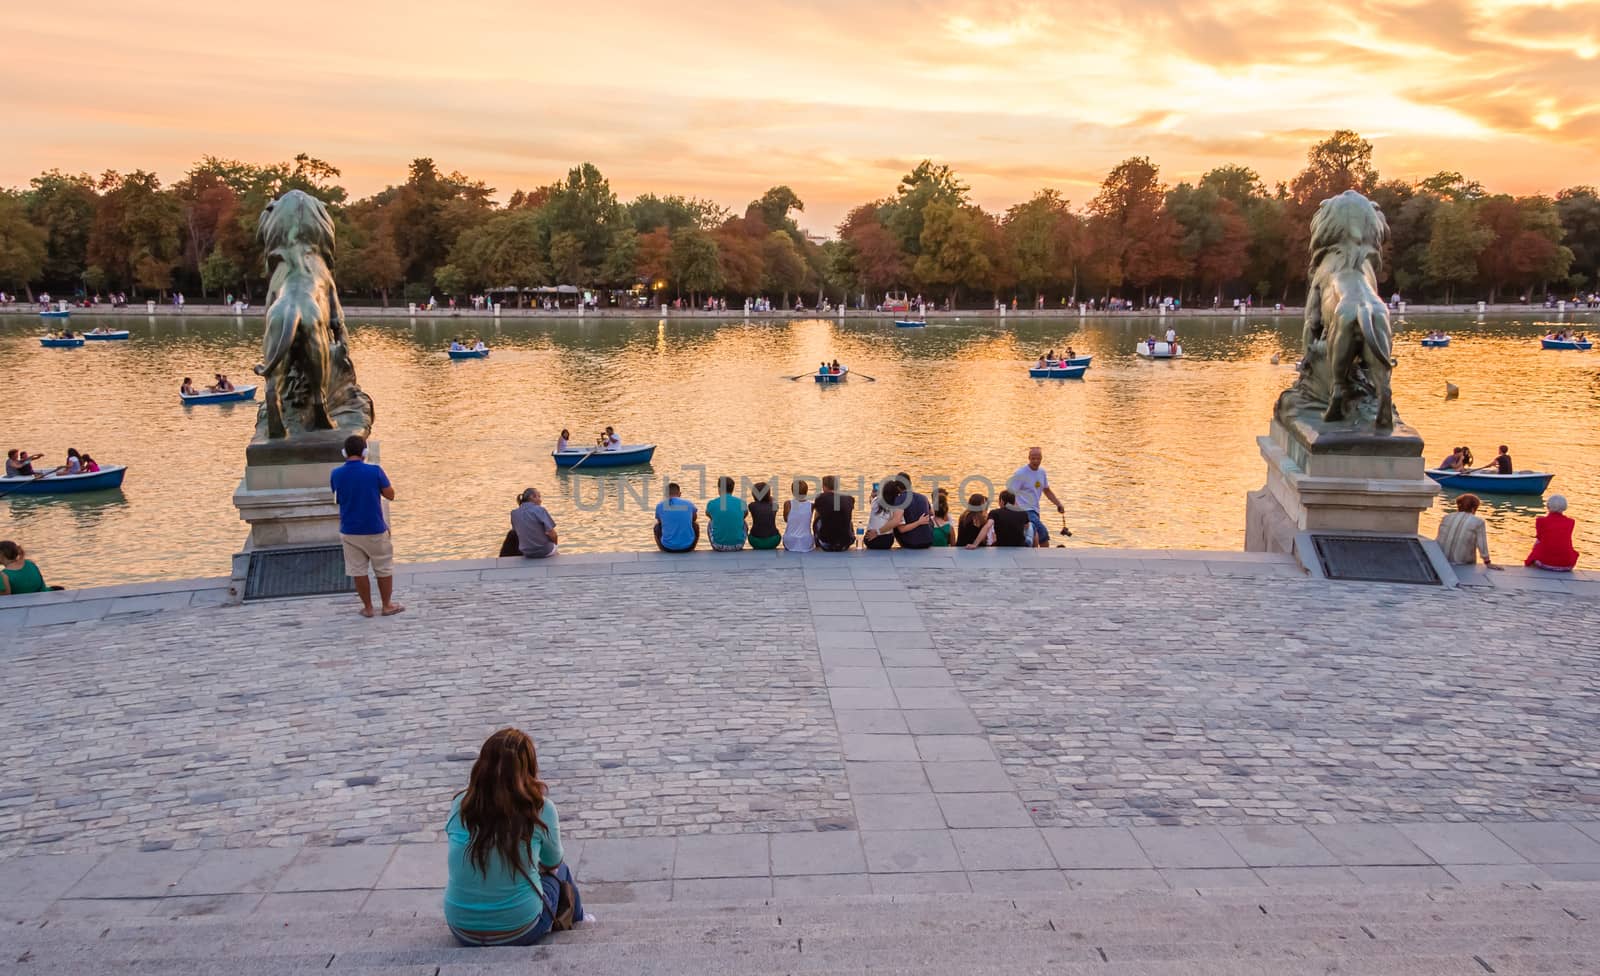 People watching sunset in Buen Retiro park Madrid by doble.d